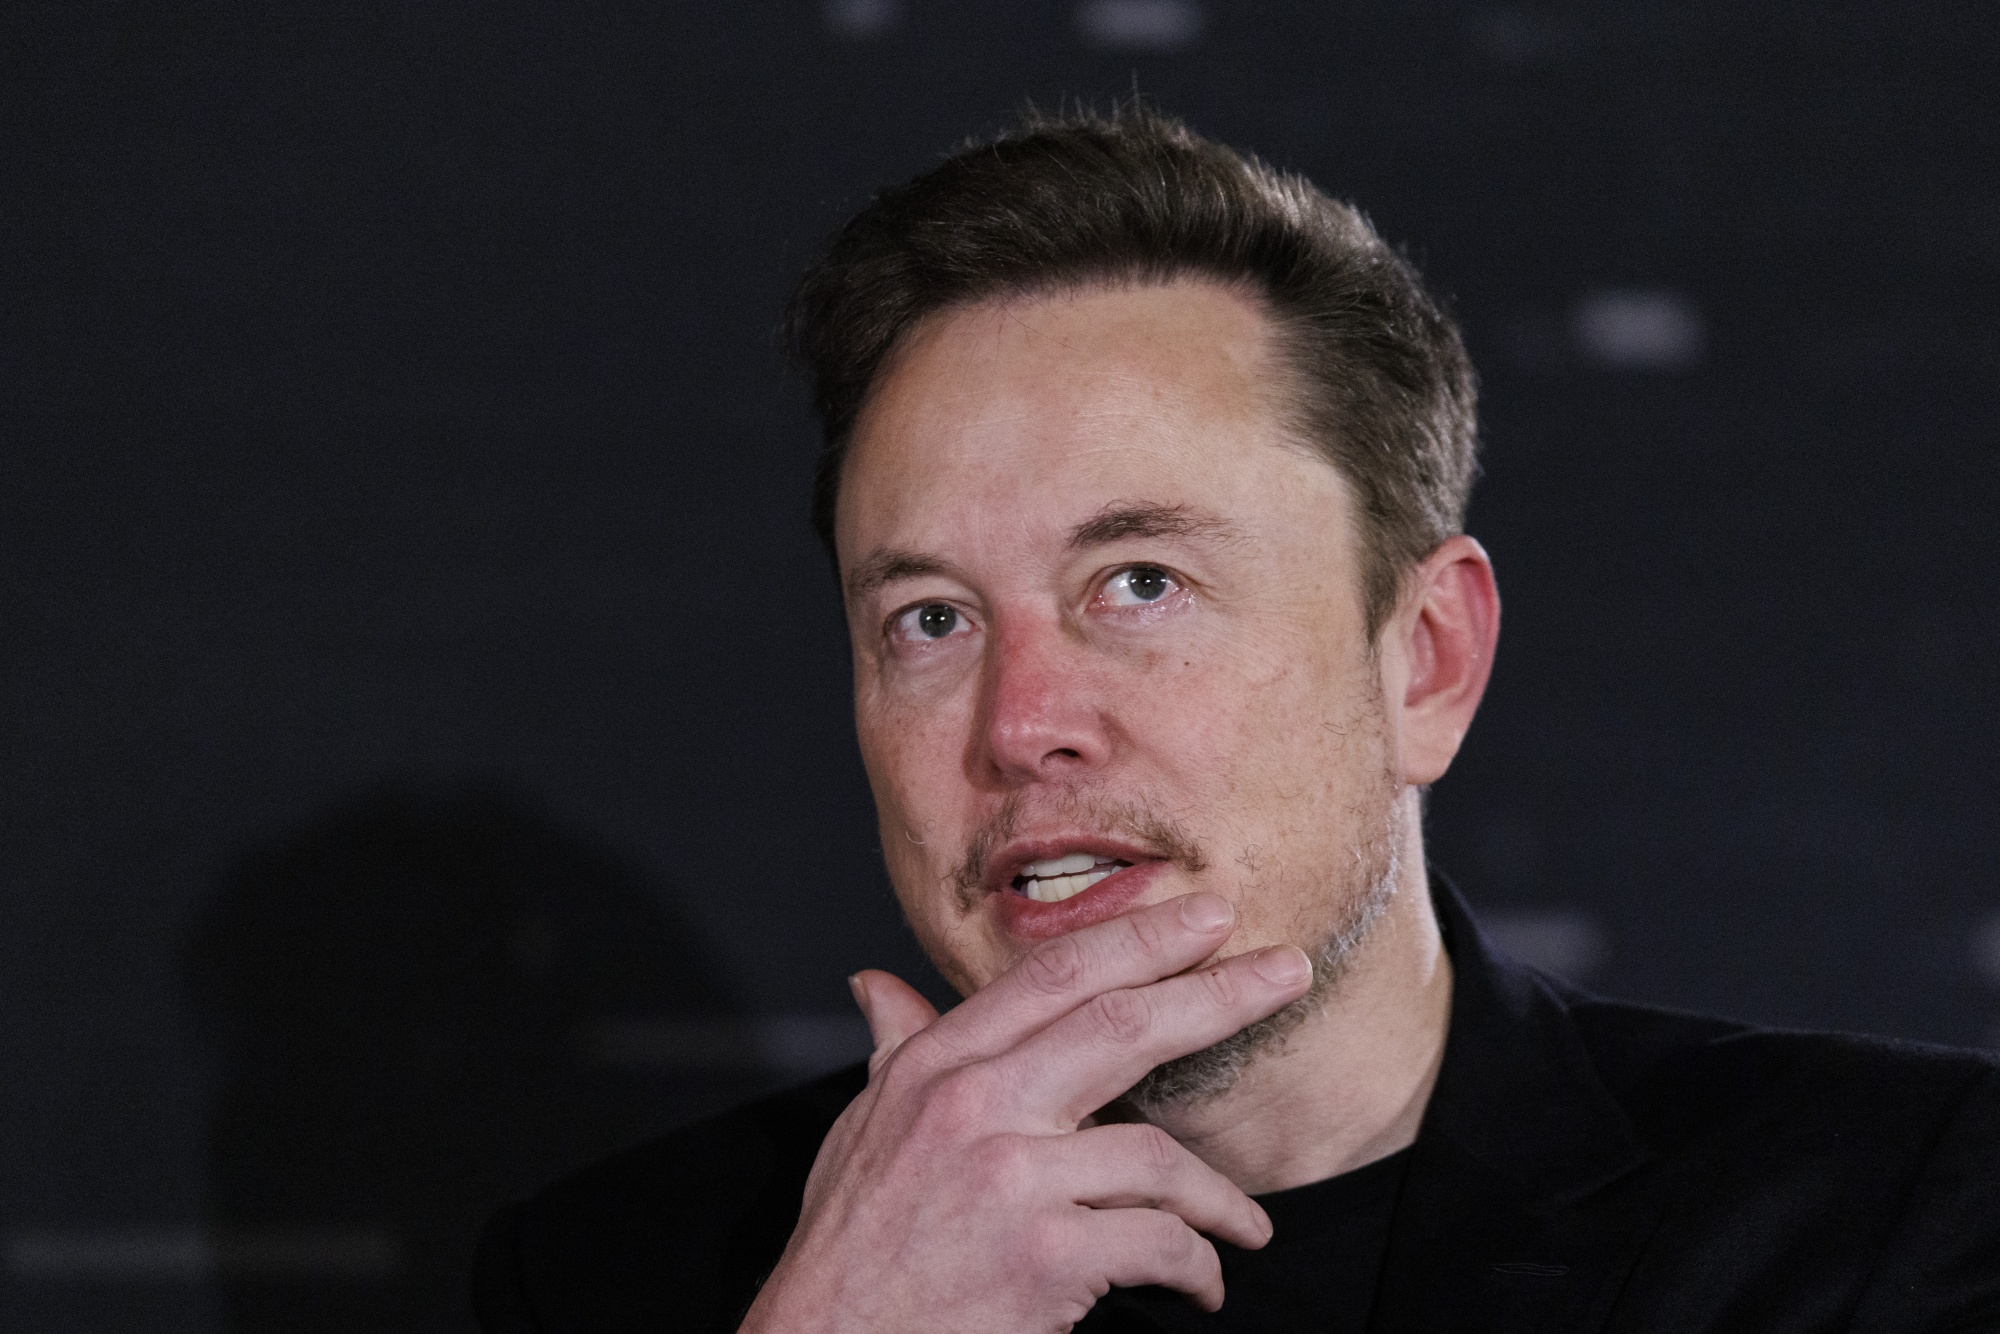 Musk's X to Hire 100 Content Moderators With Focus on Child Sexual Exploitation - Bloomberg